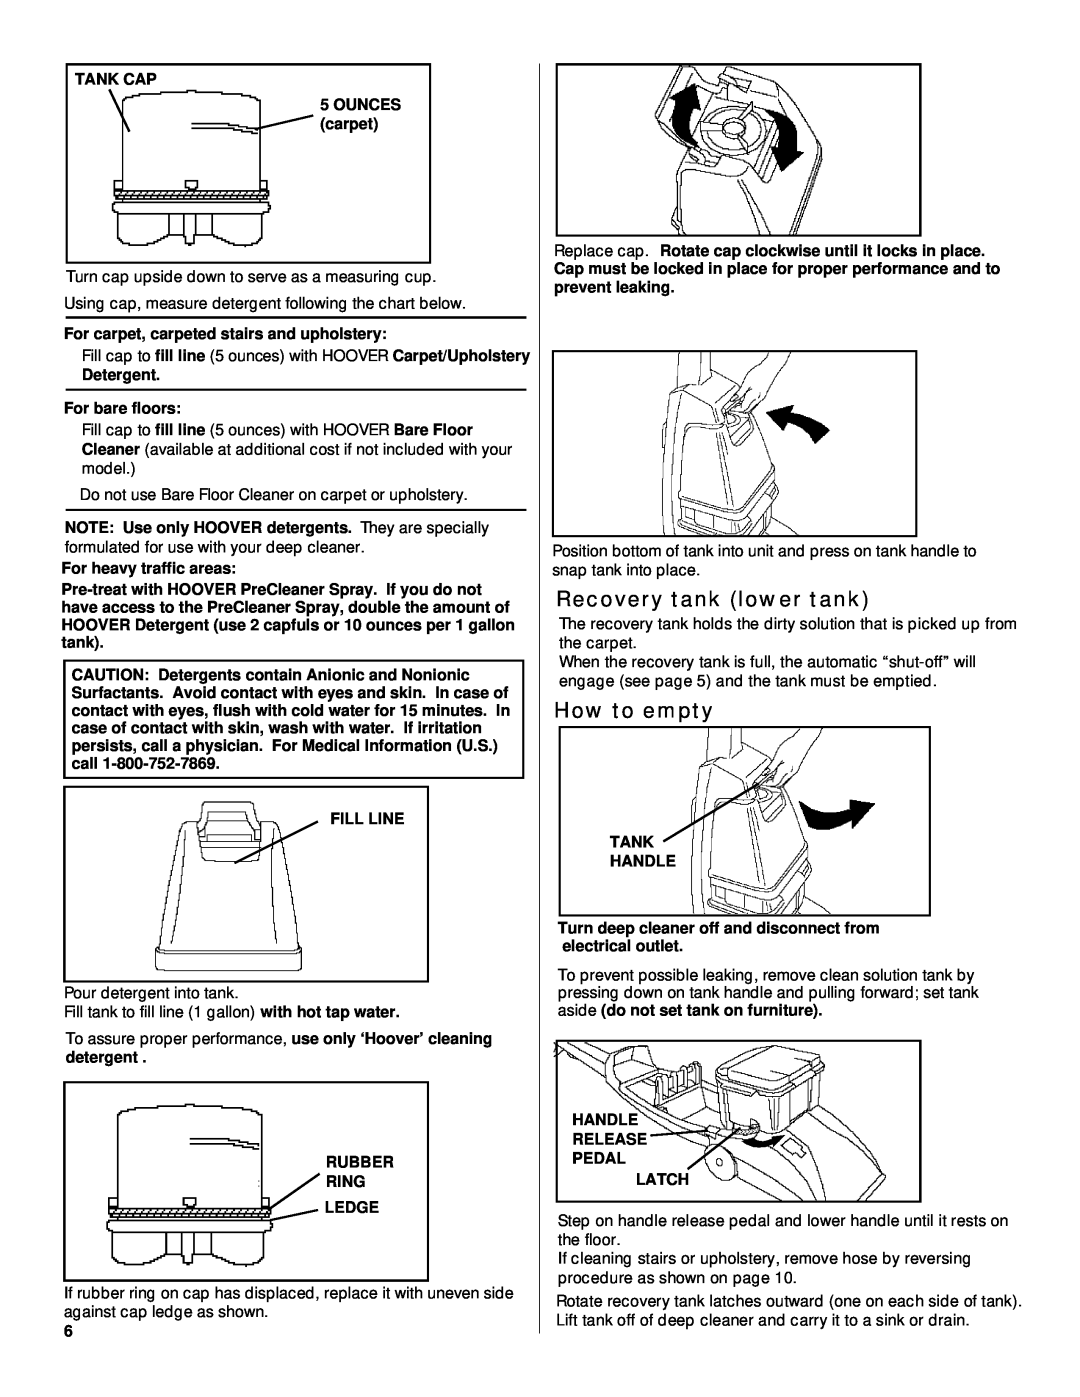 Hoover Deep Cleaner owner manual Recovery tank lower tank, How to empty 